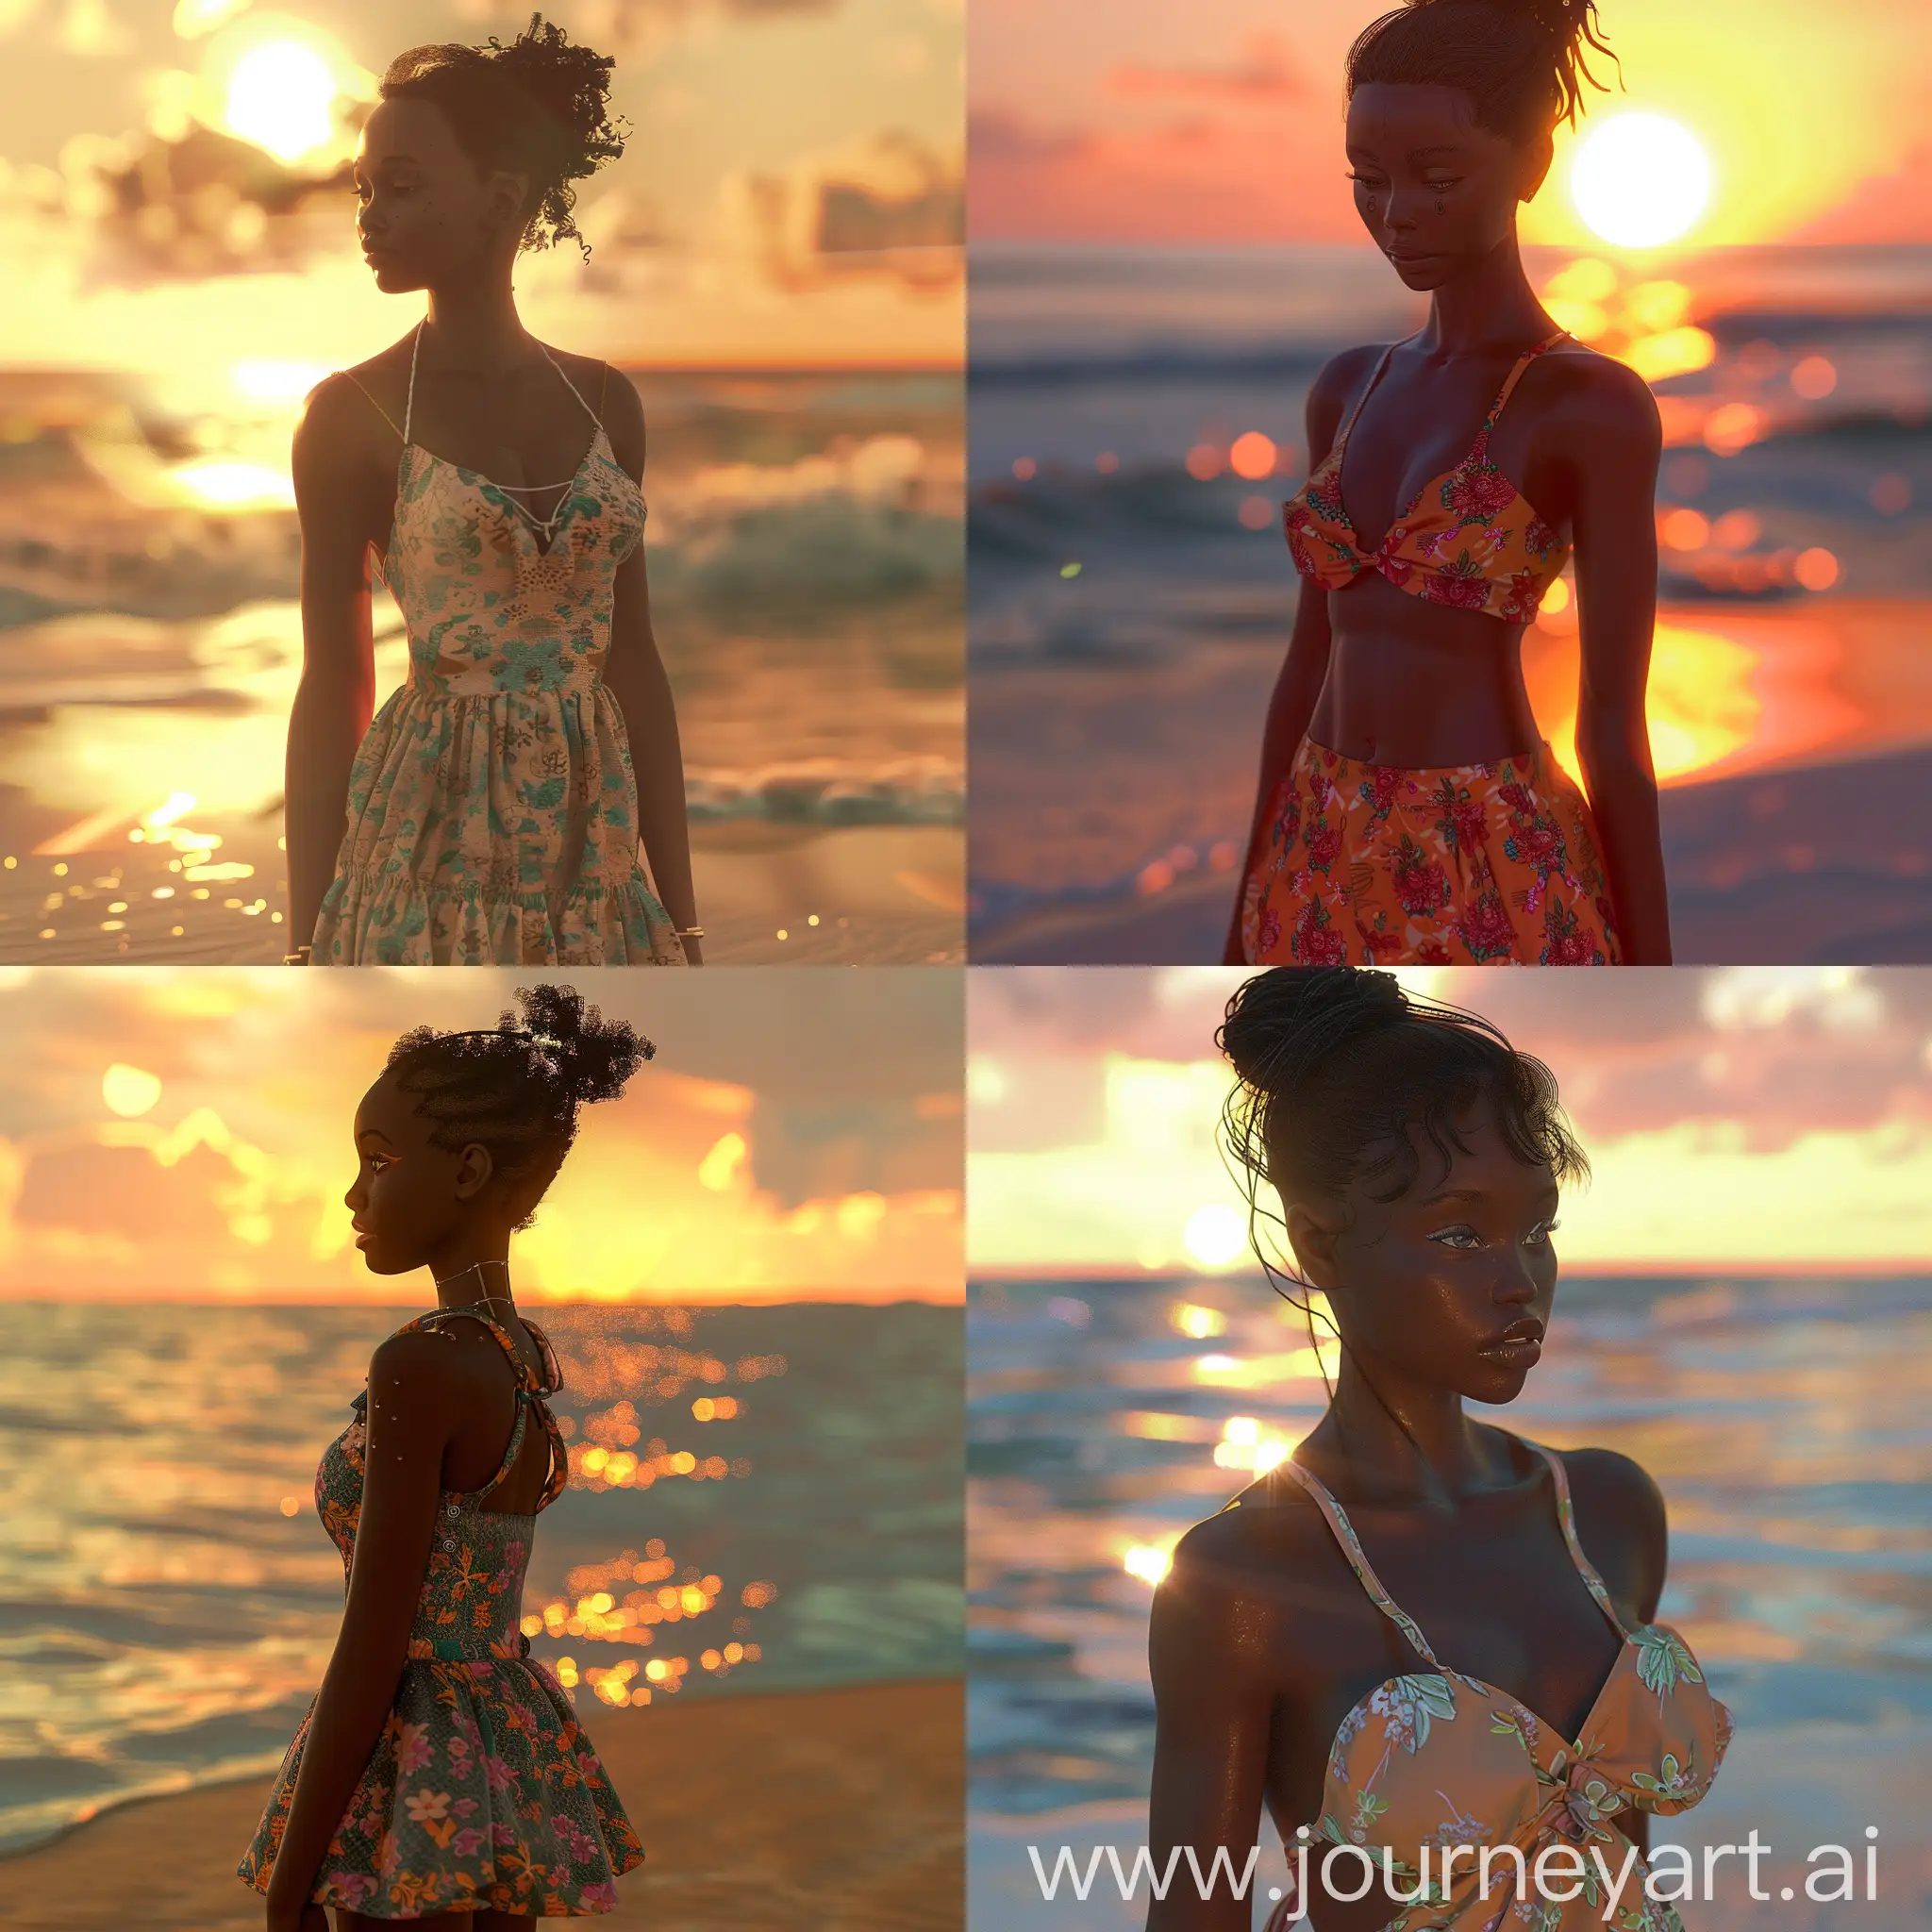 Create a photo-realistic portrayal of a android black woman with a carefree spirit, donning a summer dress. Set the scene on a sandy beach during a sunset, with the warm glow of the sun reflecting on the water, creating a tranquil ambiance. — ar 16:9 — stylize 400 — style raw — v 6